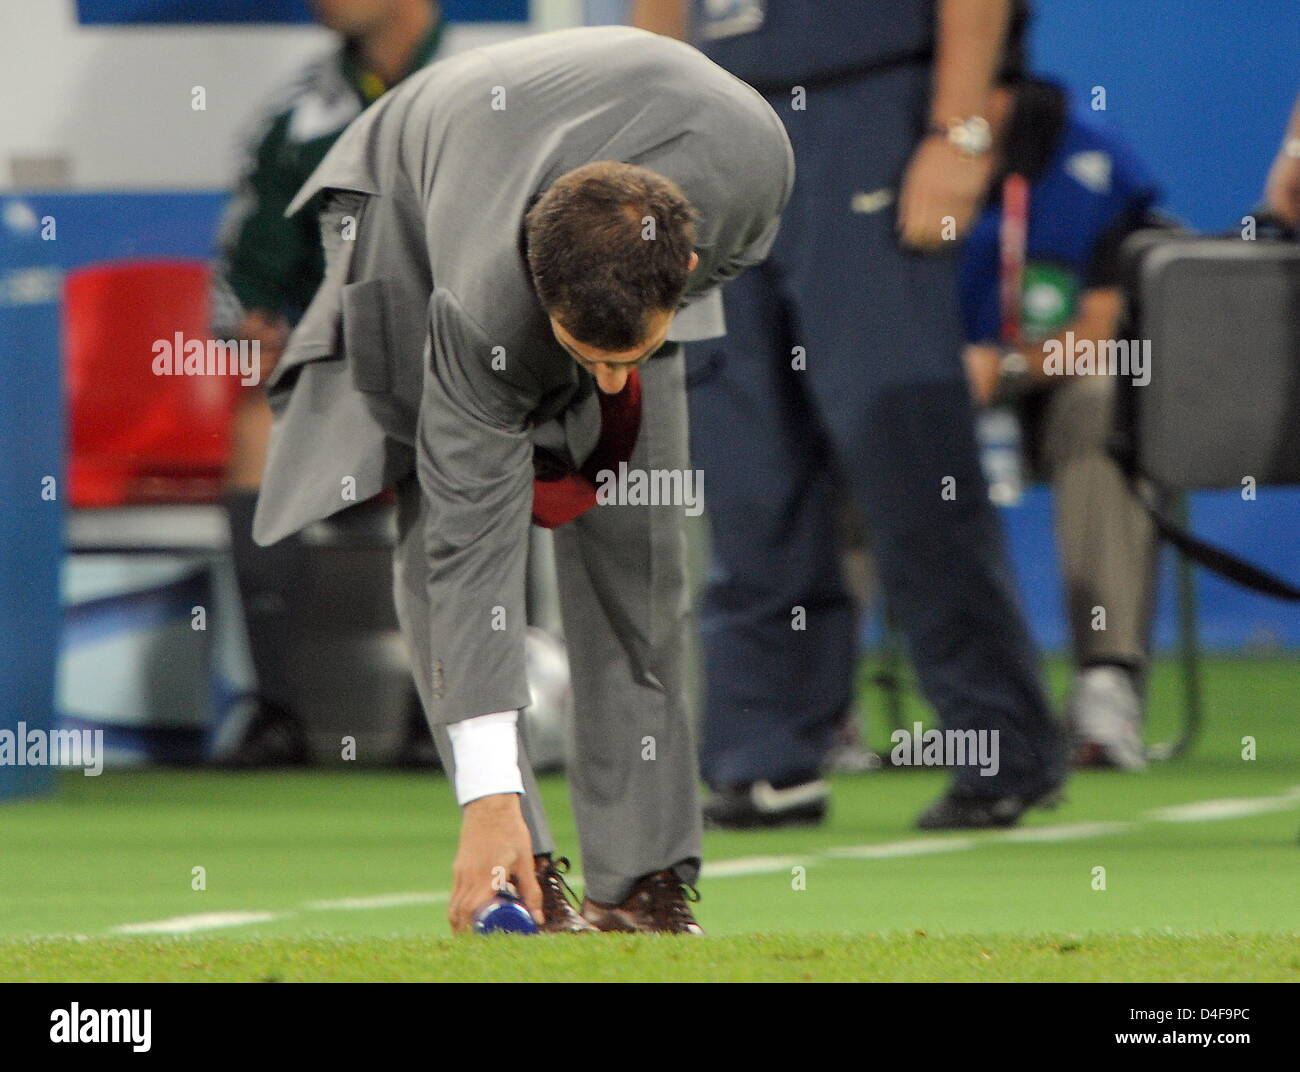 Head Coach Slaven Bilic of Croatia grabs a bottle positioned at the edge of his coaching zone during the UEFA EURO 2008 quarter final match between Croatia and Turkey at the Ernst Happel stadium in Vienna, Austria, 20 June 2008. Photo: Achim Scheidemann dpa +please note UEFA restrictions particulary in regard to slide shows and 'No Mobile Services'+ +++(c) dpa - Bildfunk+++ Stock Photo